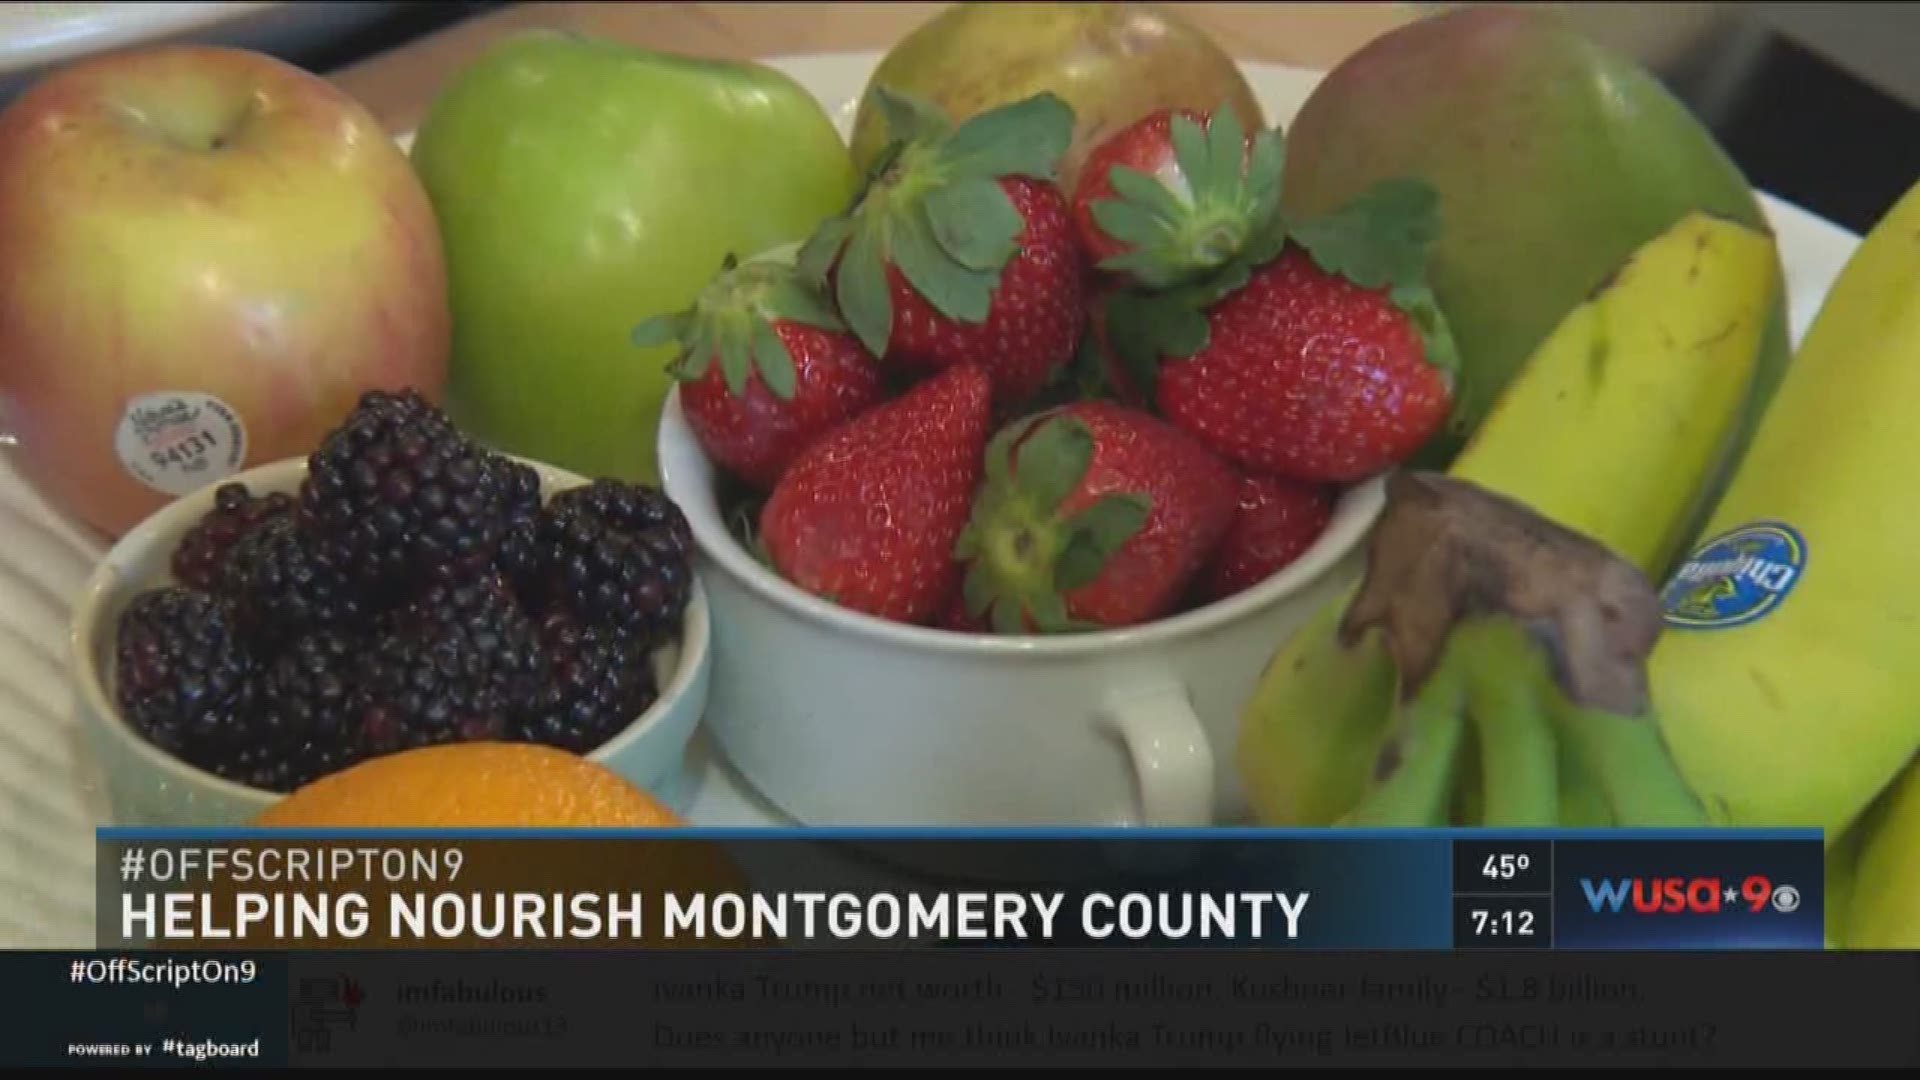 Each year as much as 40% of all food in the U.S. goes uneaten, while more than 42 million people in America suffer daily from food insecurity. It was stats like those that inspired Montgomery Co. man Brett Meyers to launch Nourish Now.